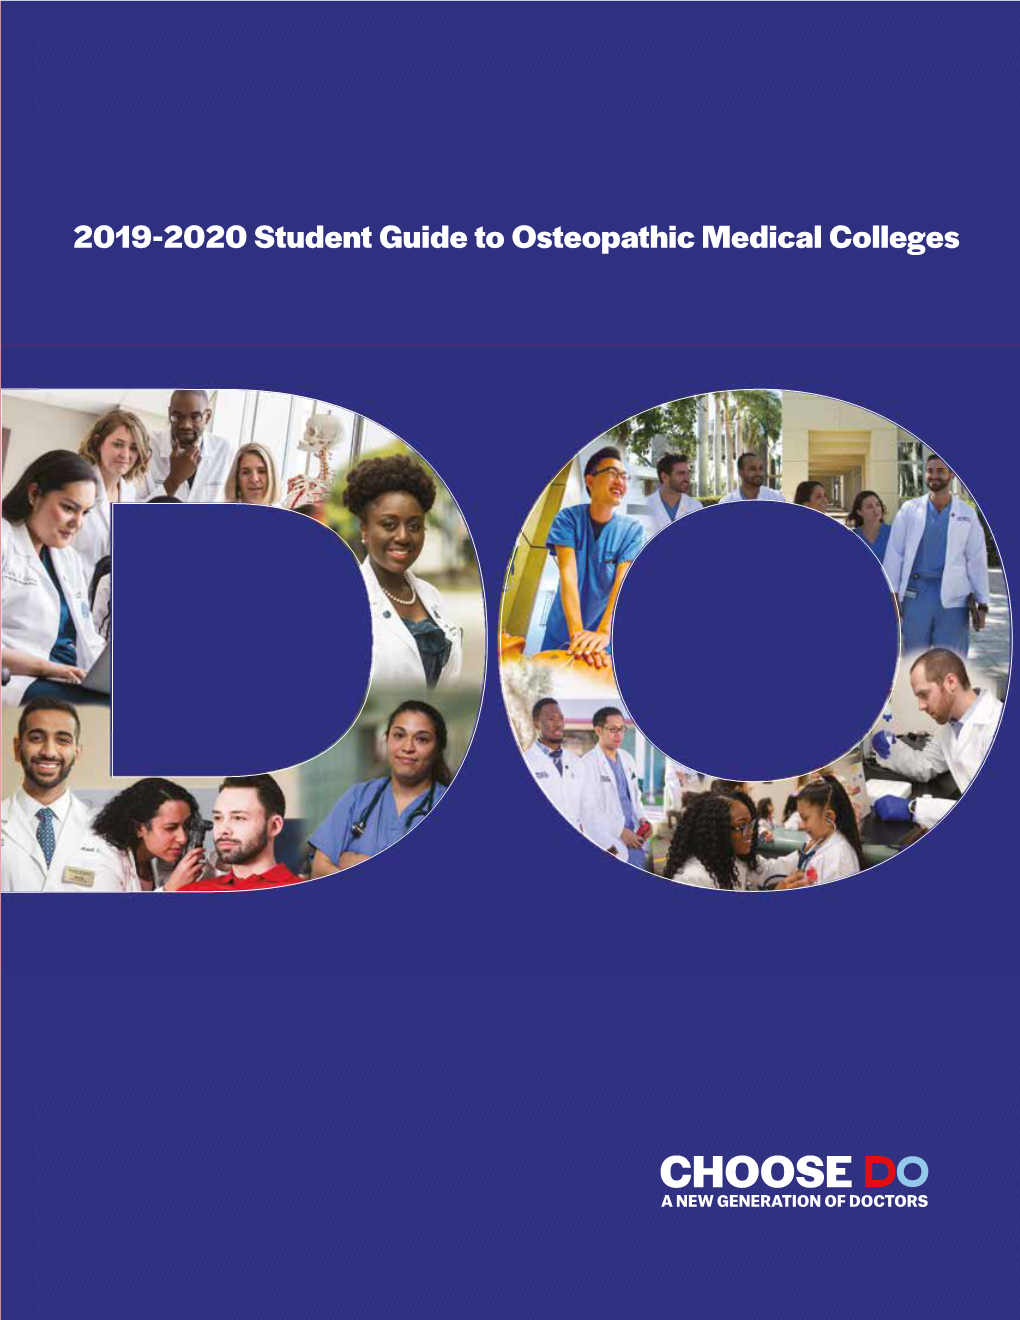 2019-2020 Student Guide to Osteopathic Medical Colleges 2019-2020 STUDENT GUIDE to OSTEOPATHIC MEDICAL COLLEGES